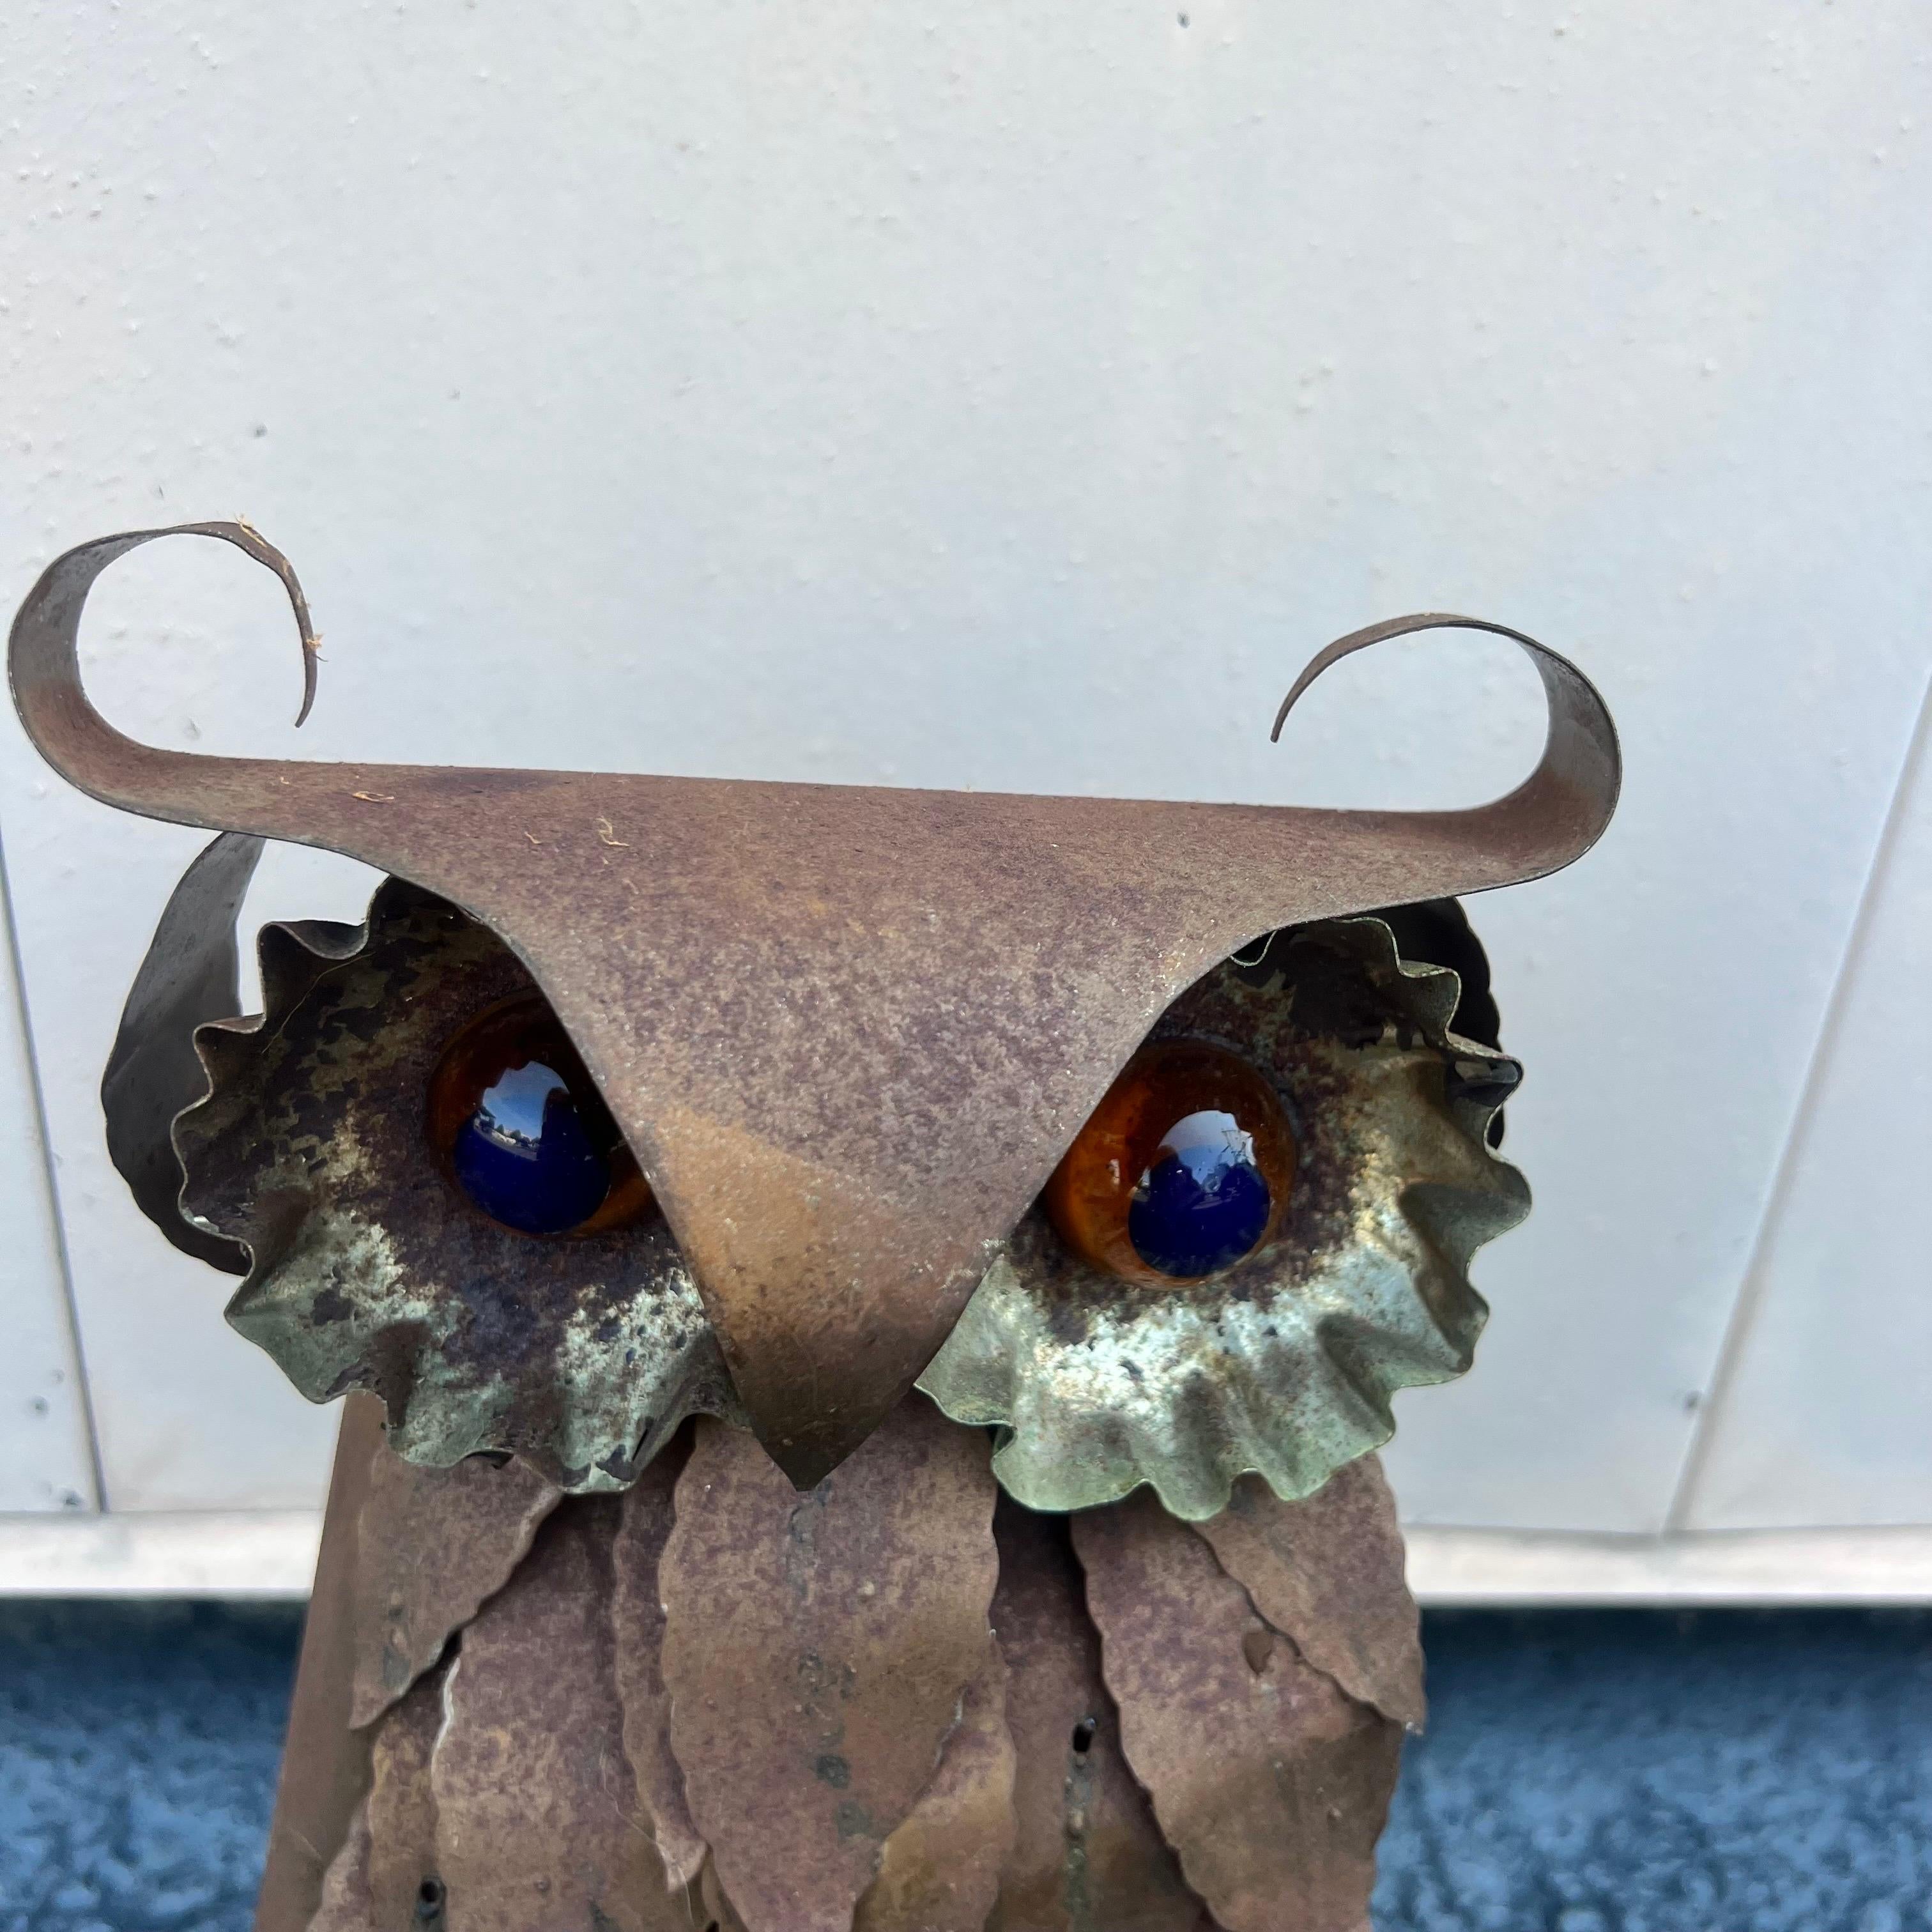 Vintage Midcentury Brutalist Copper Owl Sculpture In The Style Of Curtis Jere with Lucite eyes Copper owl.  This amazing copper owl stands about 12